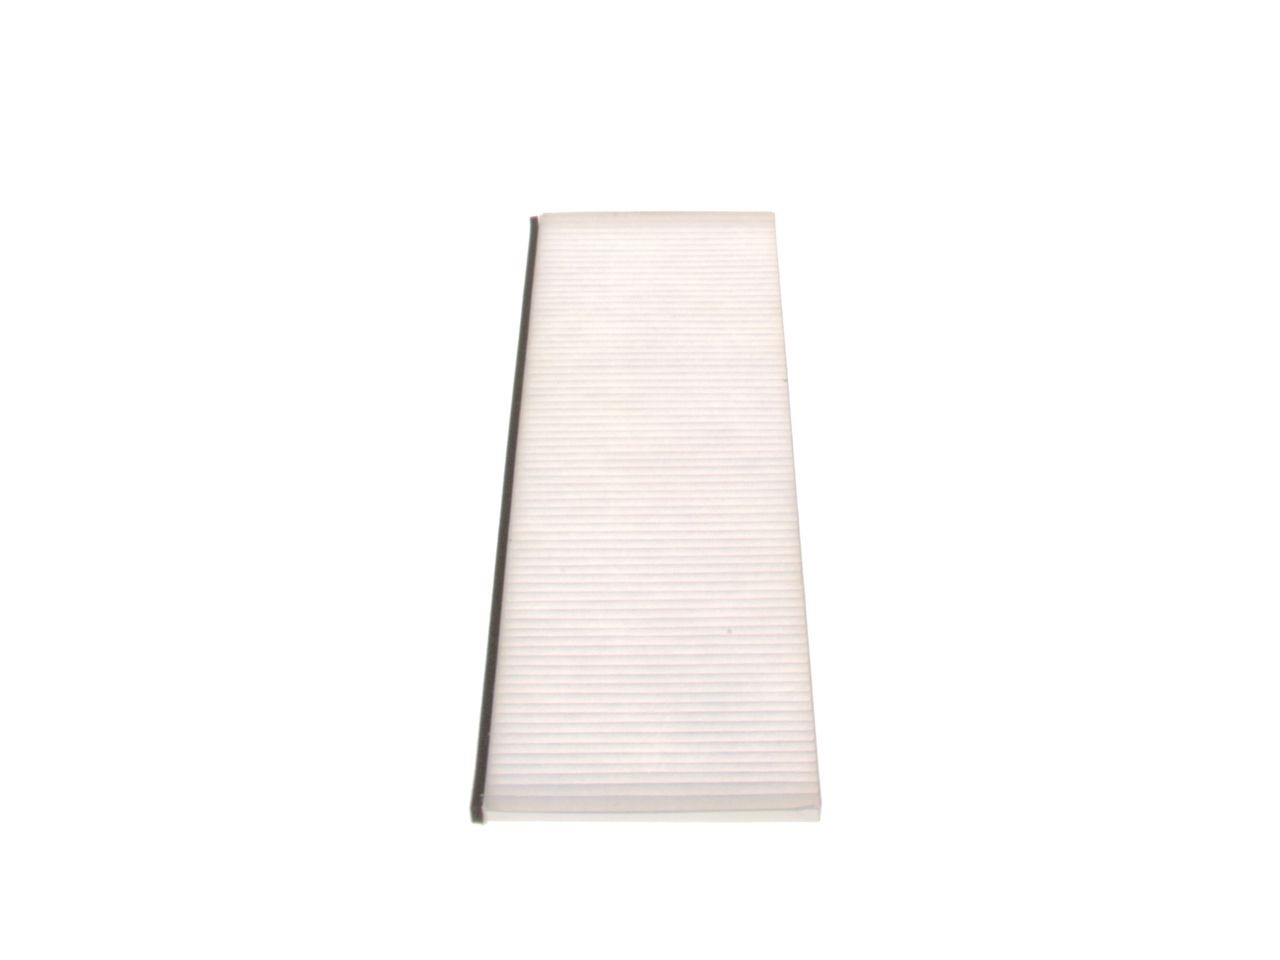 1987431205 Air con filter M 1205 BOSCH for rooftop air conditioner, Particulate Filter, 456 mm x 150 mm x 13 mm